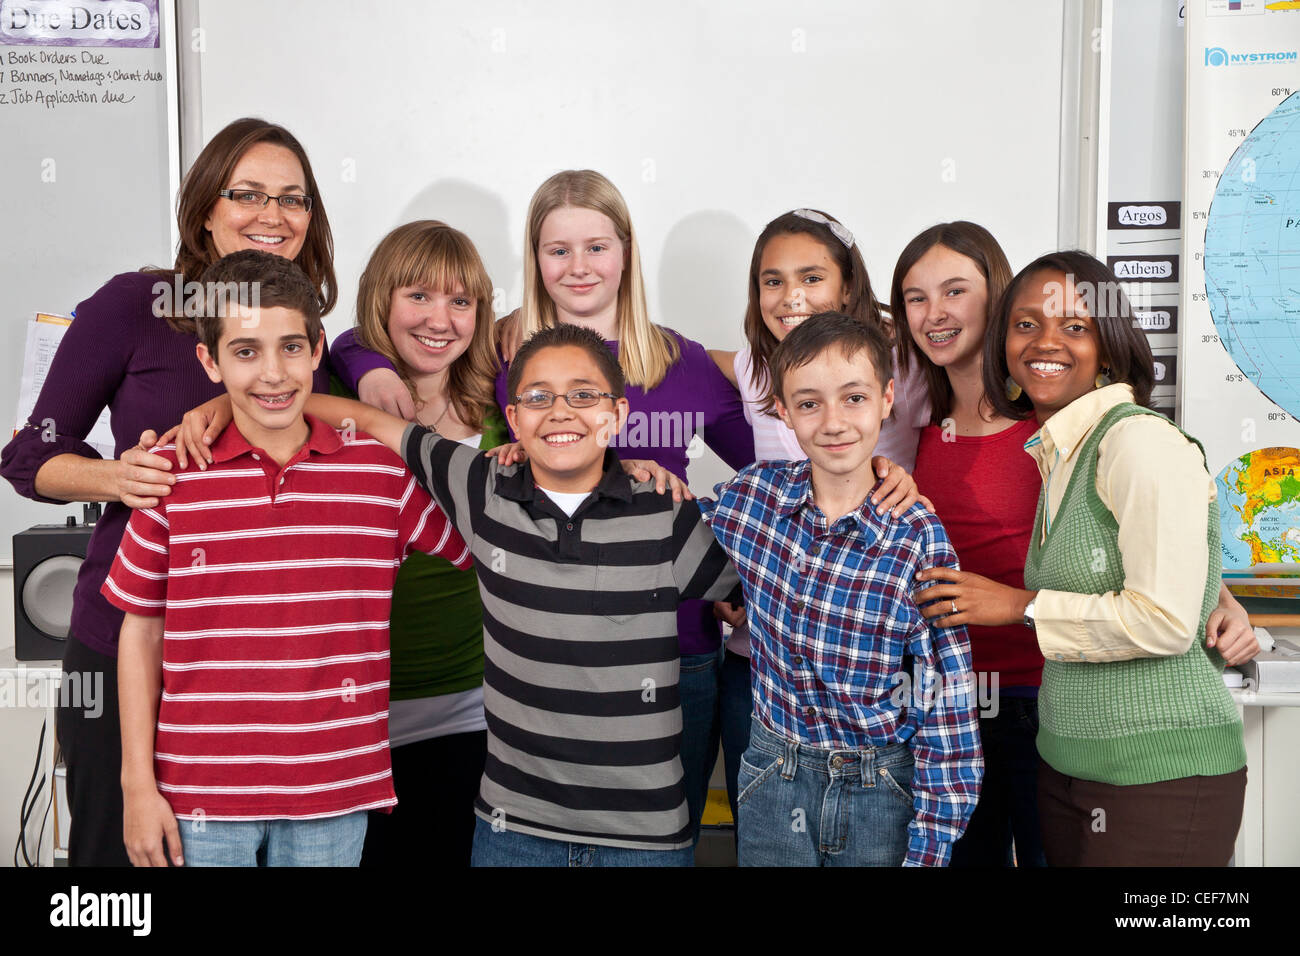 school class interracial Multi Ethnically diverse kids hang hanging out Group students teacher teachers aide smiling camera. Different heights Stock Photo